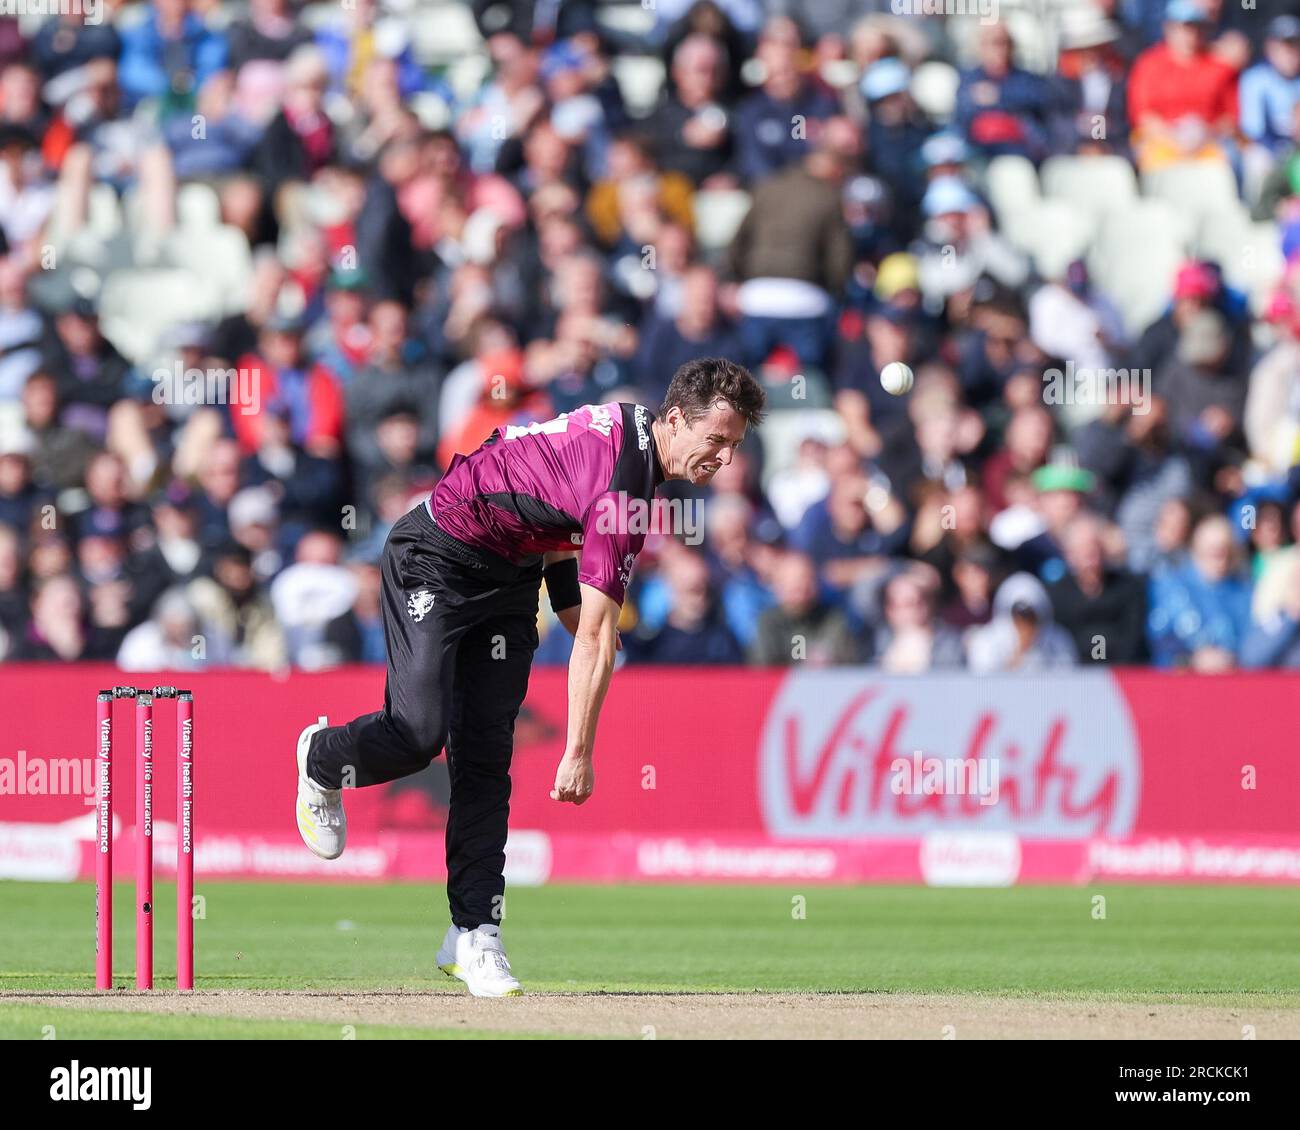 Taken in Birmingham, UK on 15 Jul 2023 at Warwickshire County Cricket Club, Edgbaston.  Pictured is Somerset’s Matt Henry in action bowling during the 2023 Vitality Blast Semi Final between Somerset & Surrey  Image is for editorial use only - credit to Stu Leggett via Alamy Live News Stock Photo